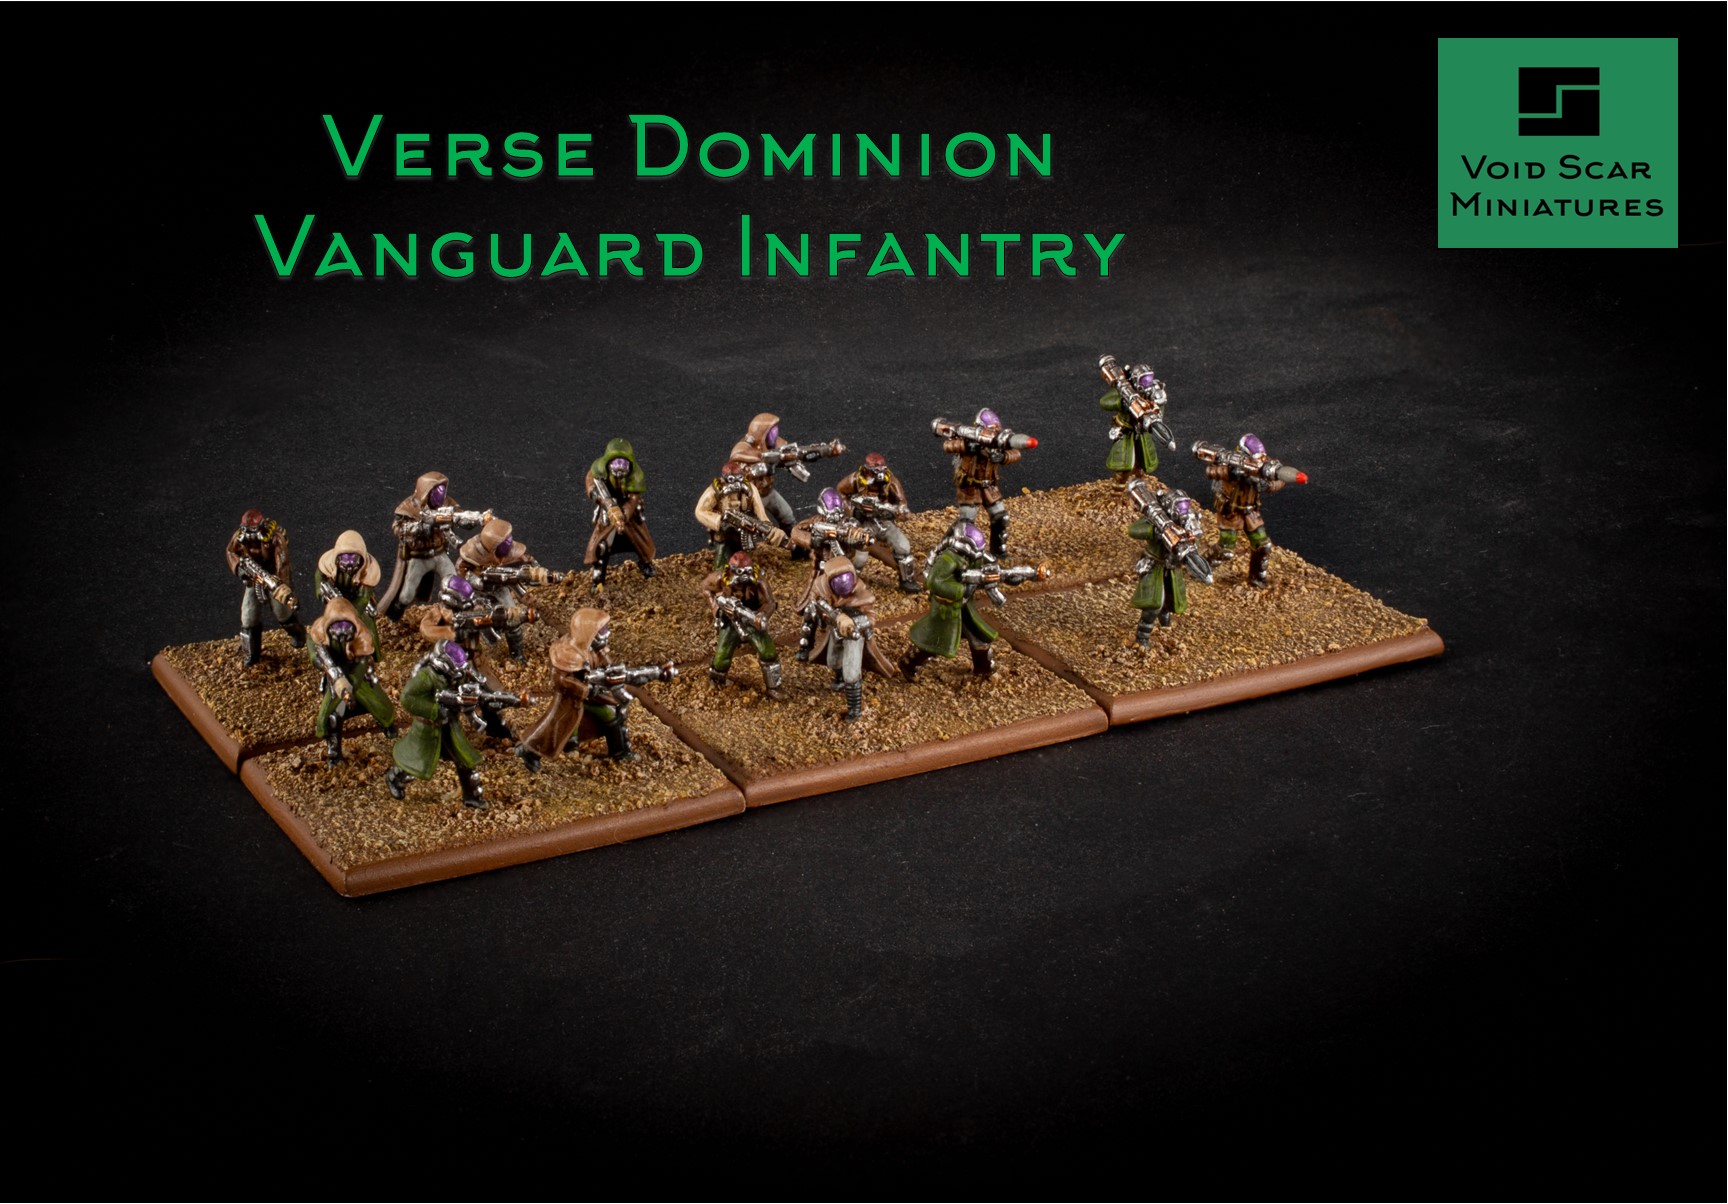 New Verse Dominion infantry releases